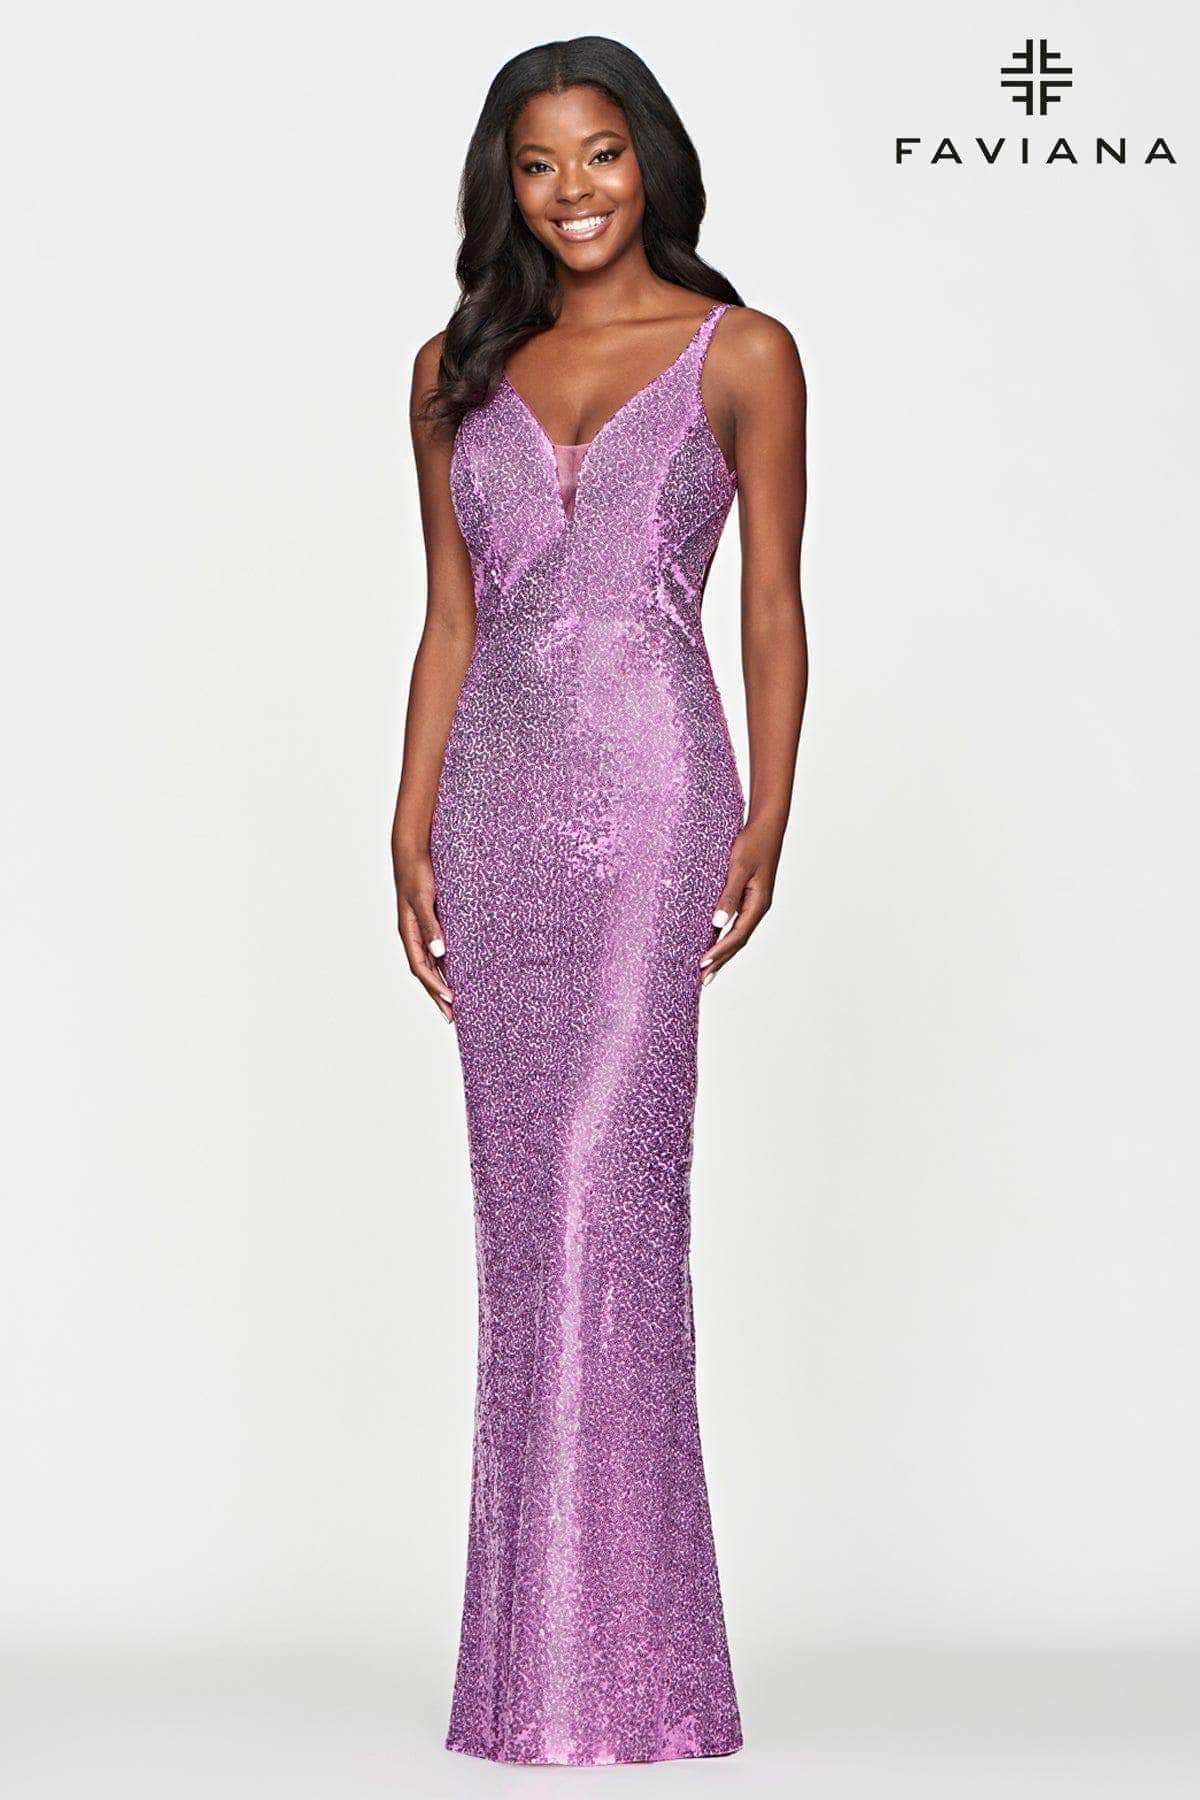 Image of Faviana - S10636 V-Neck Cut-Out Back Sequin Prom Dress